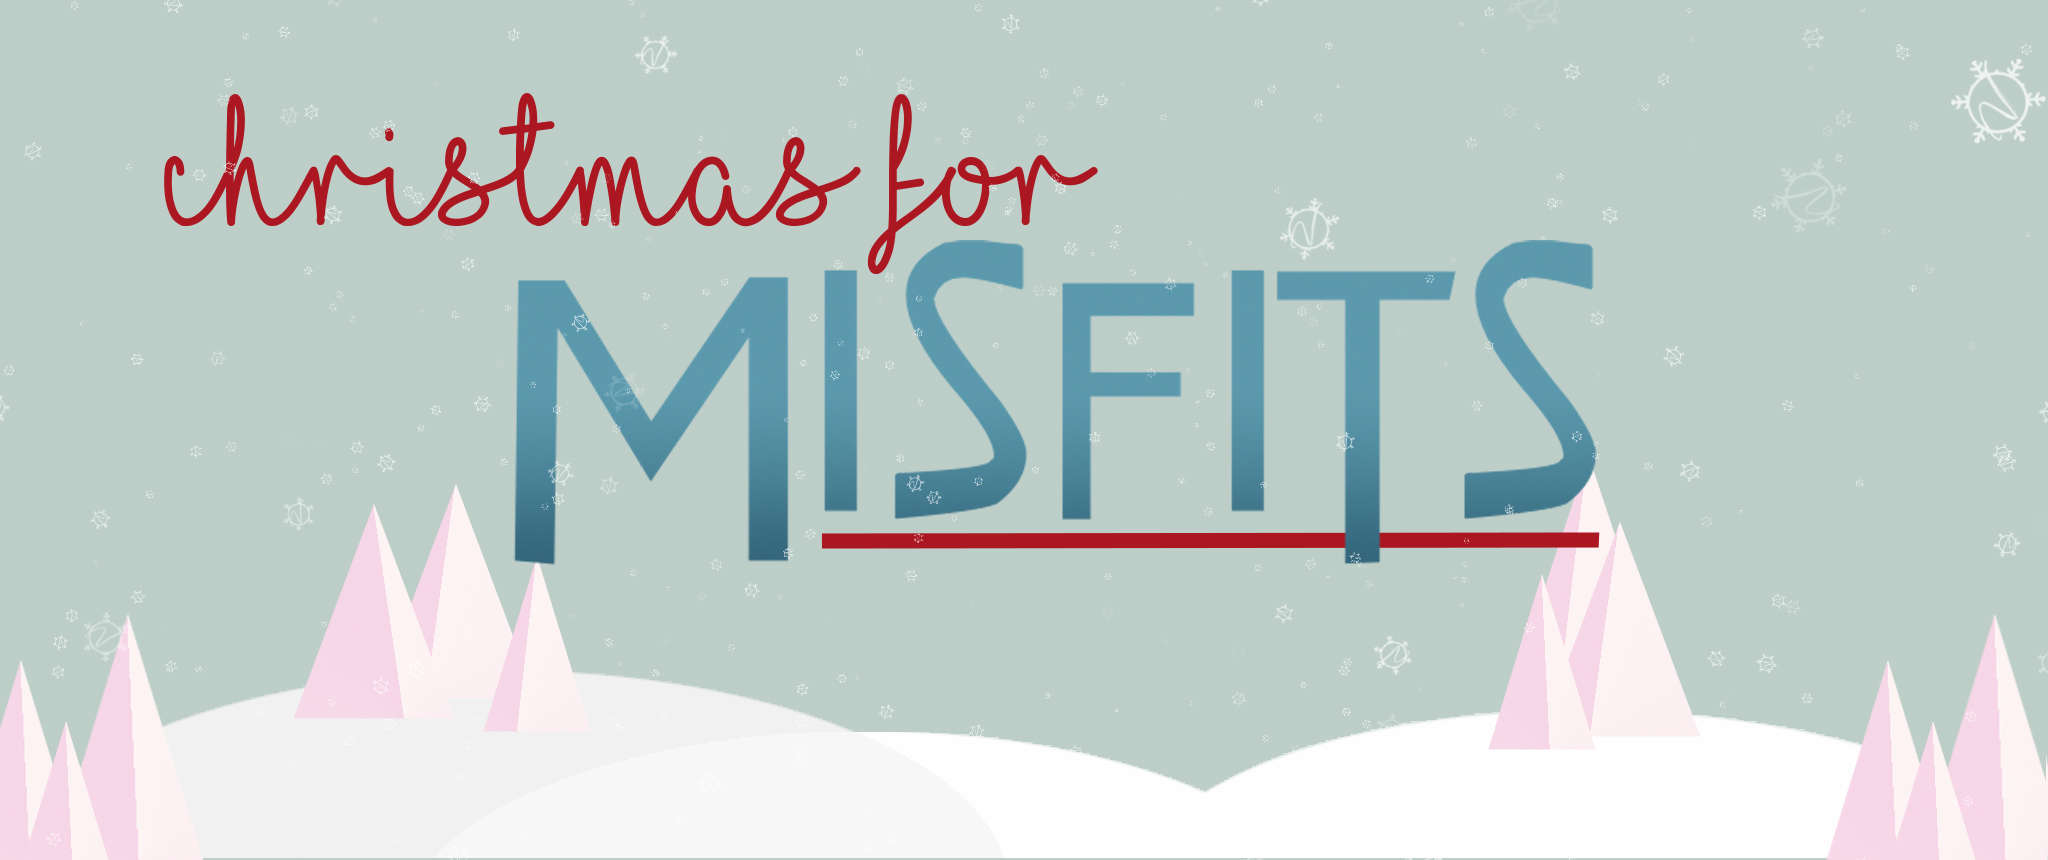 Christmas For Misfits: Purpose For Misfits